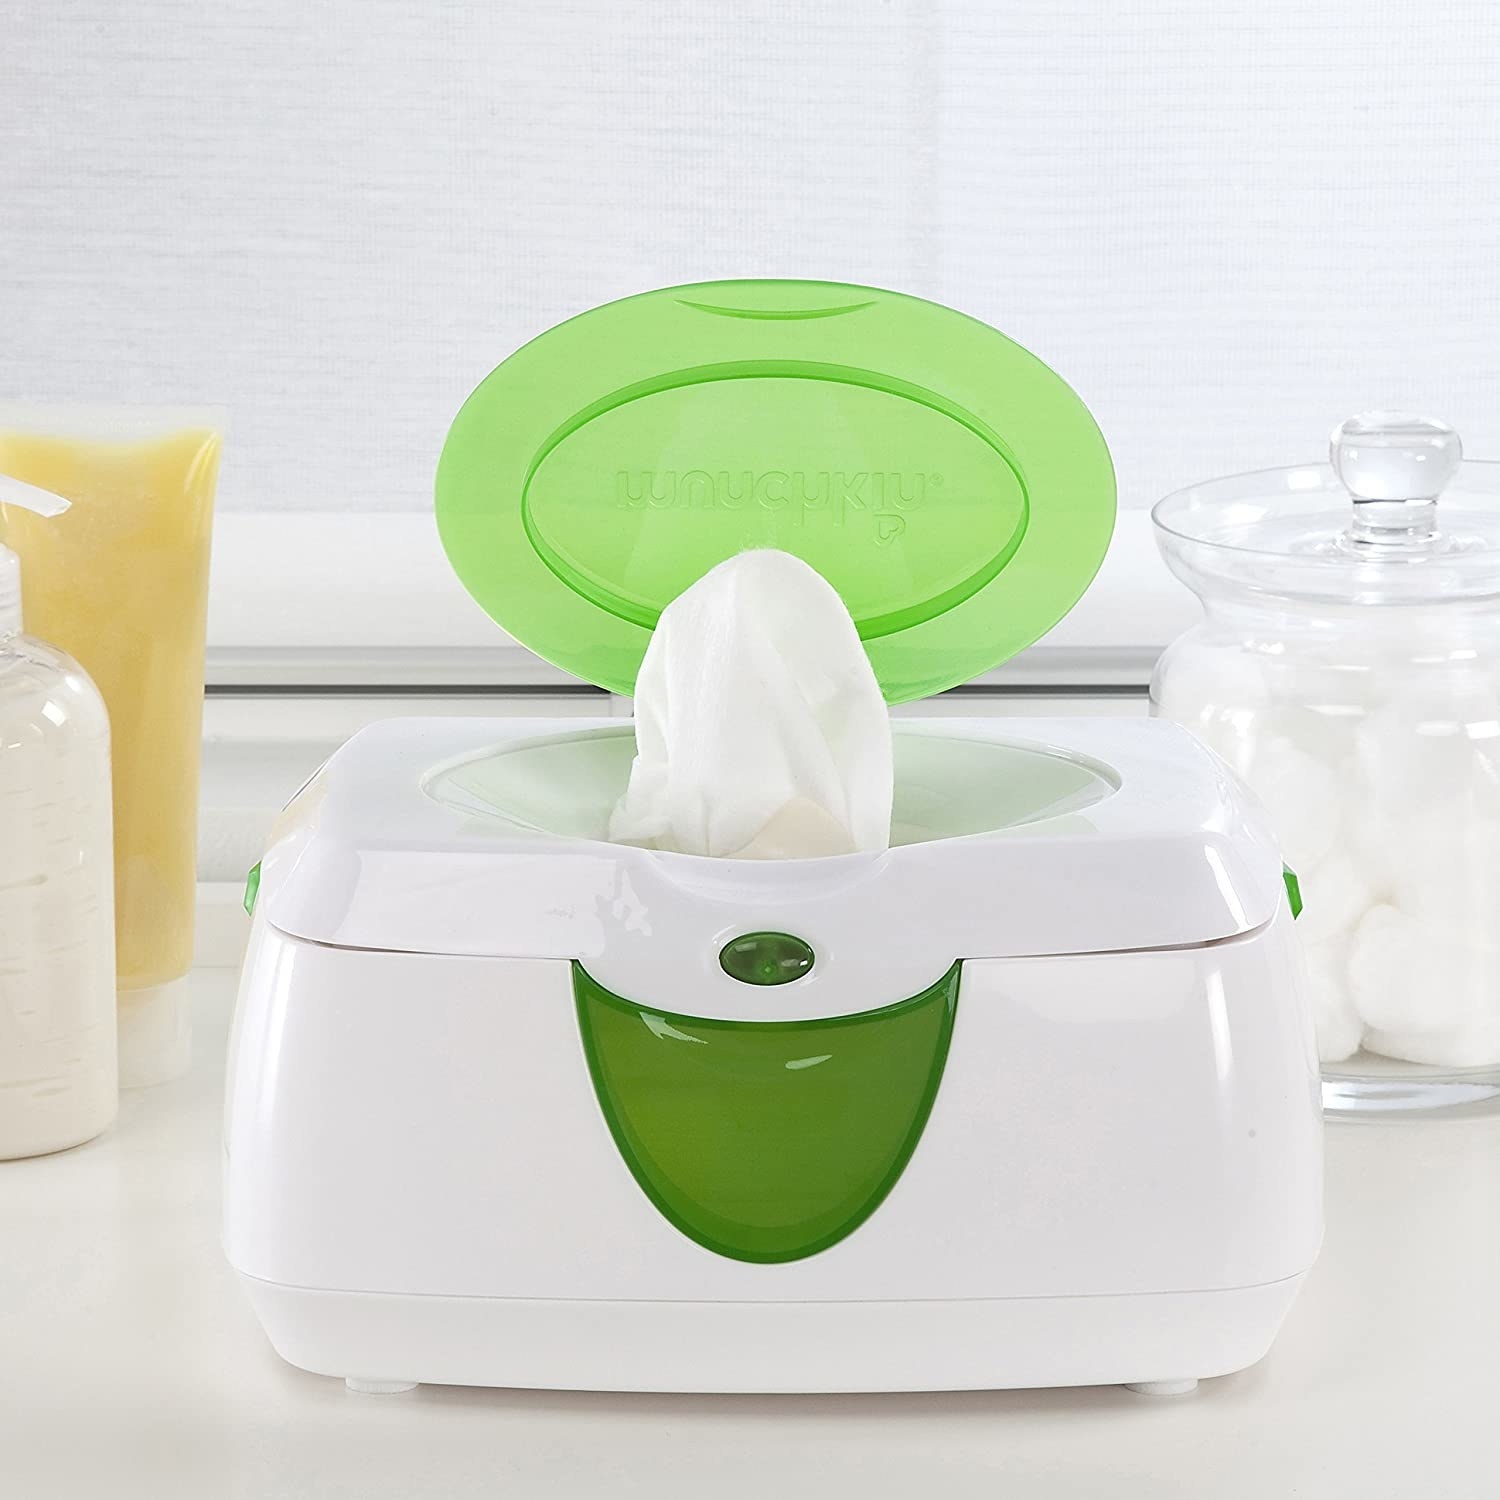 A baby wipe dispenser sitting on a counter